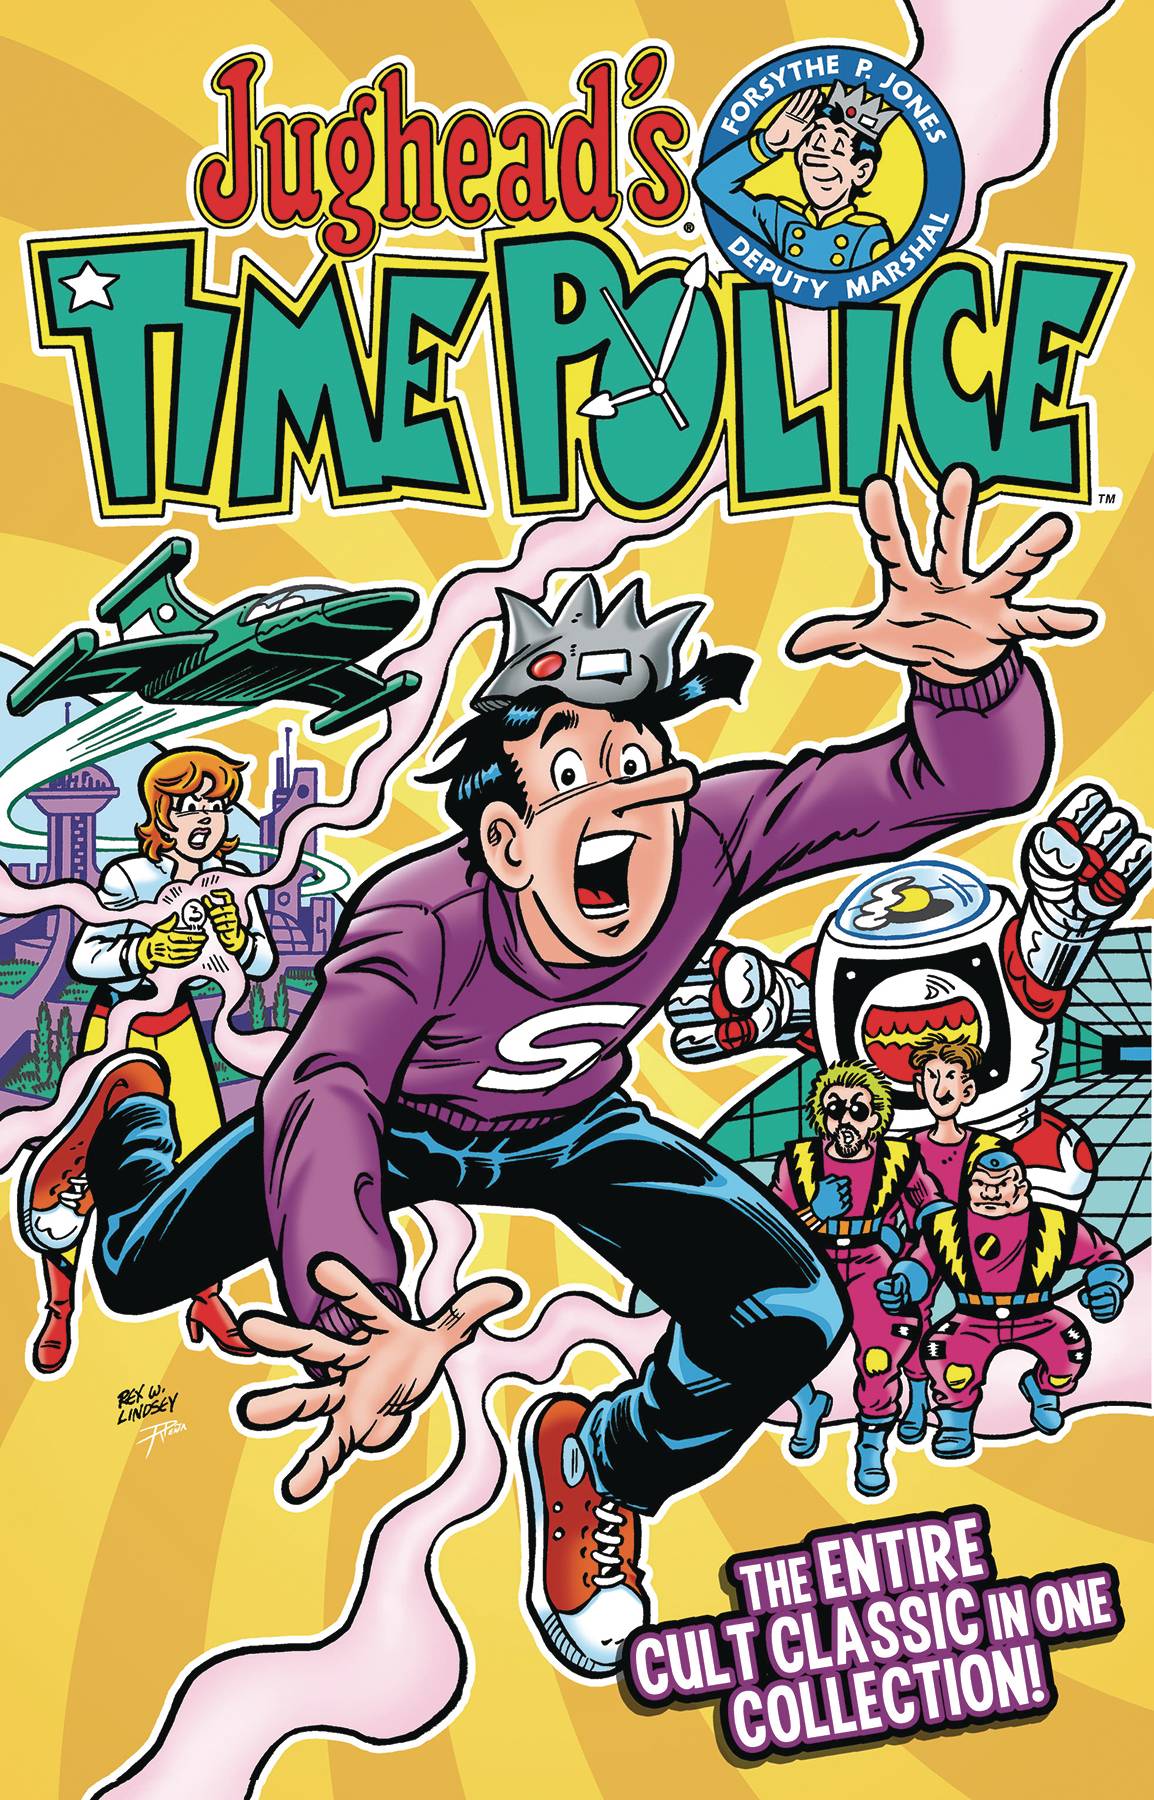 JUGHEADS TIME POLICE TP